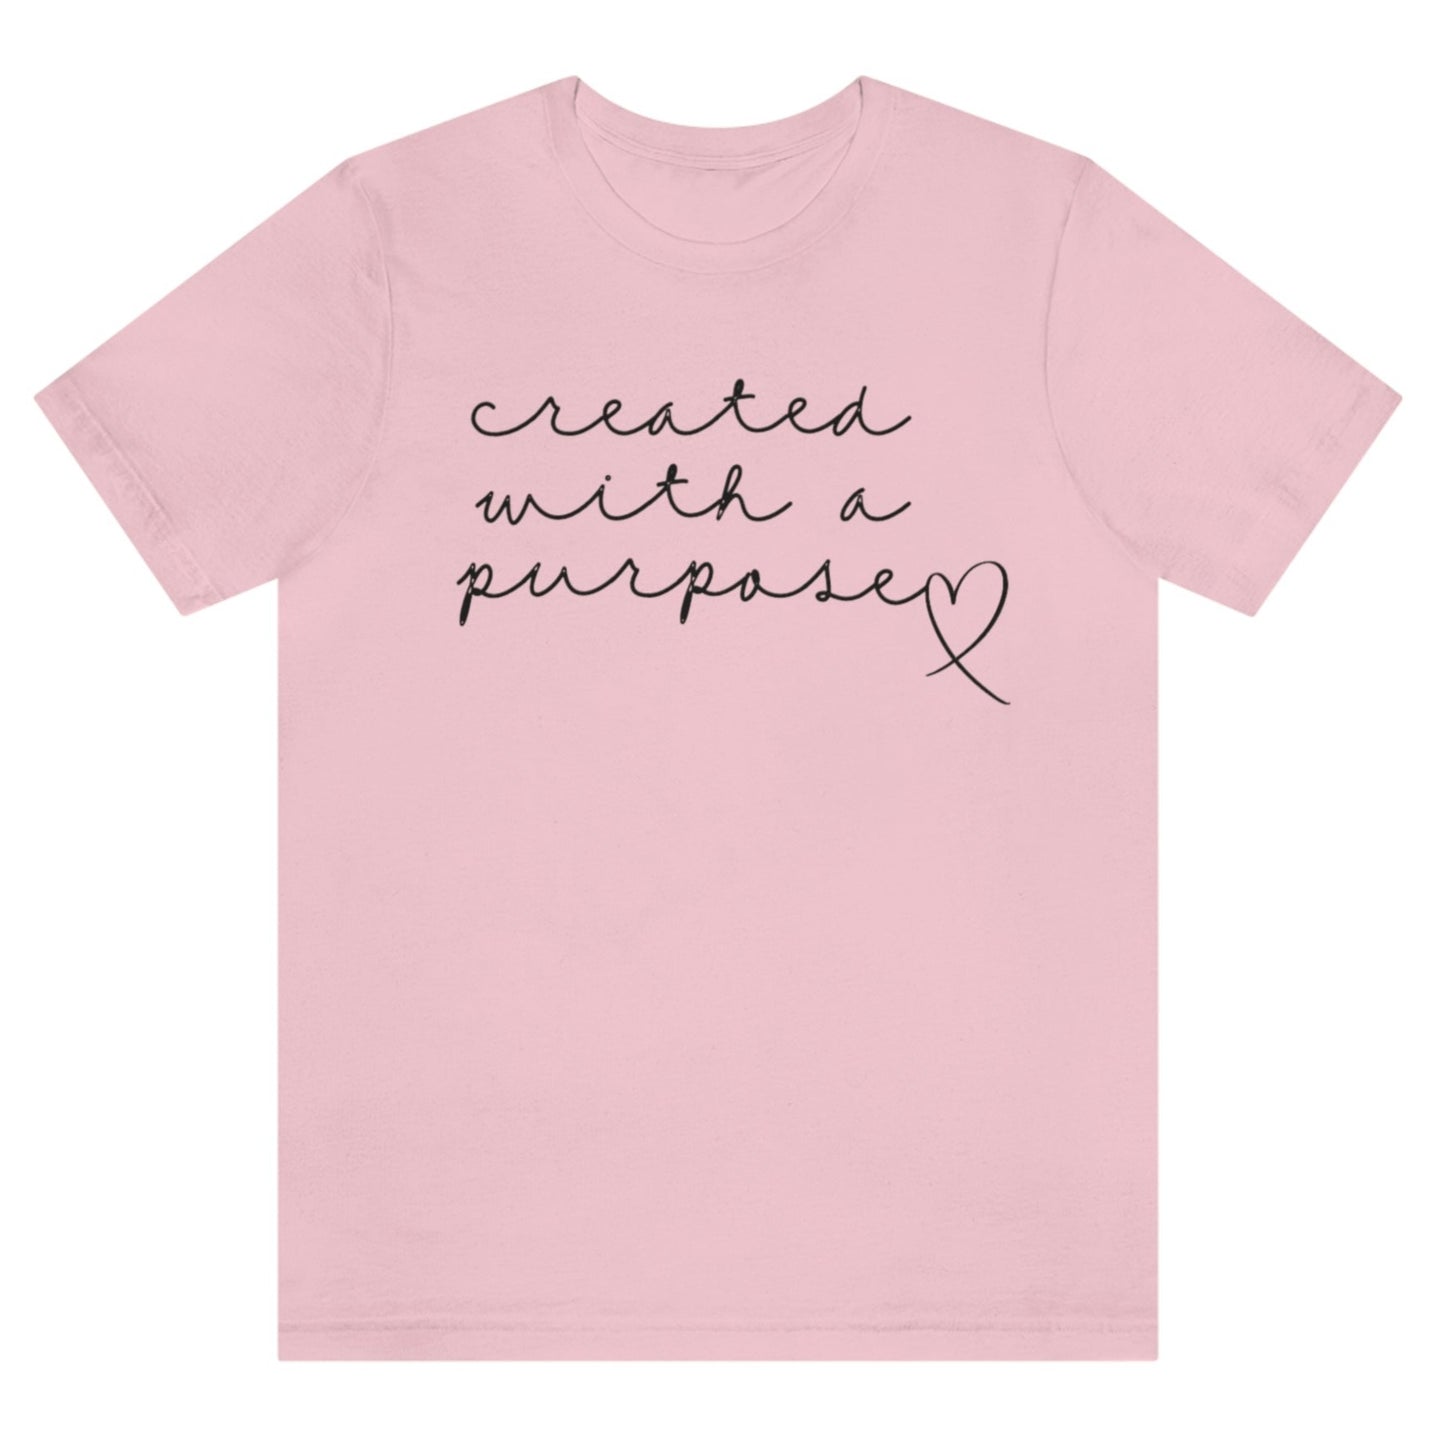 created-with-a-purpose-pink-t-shirt